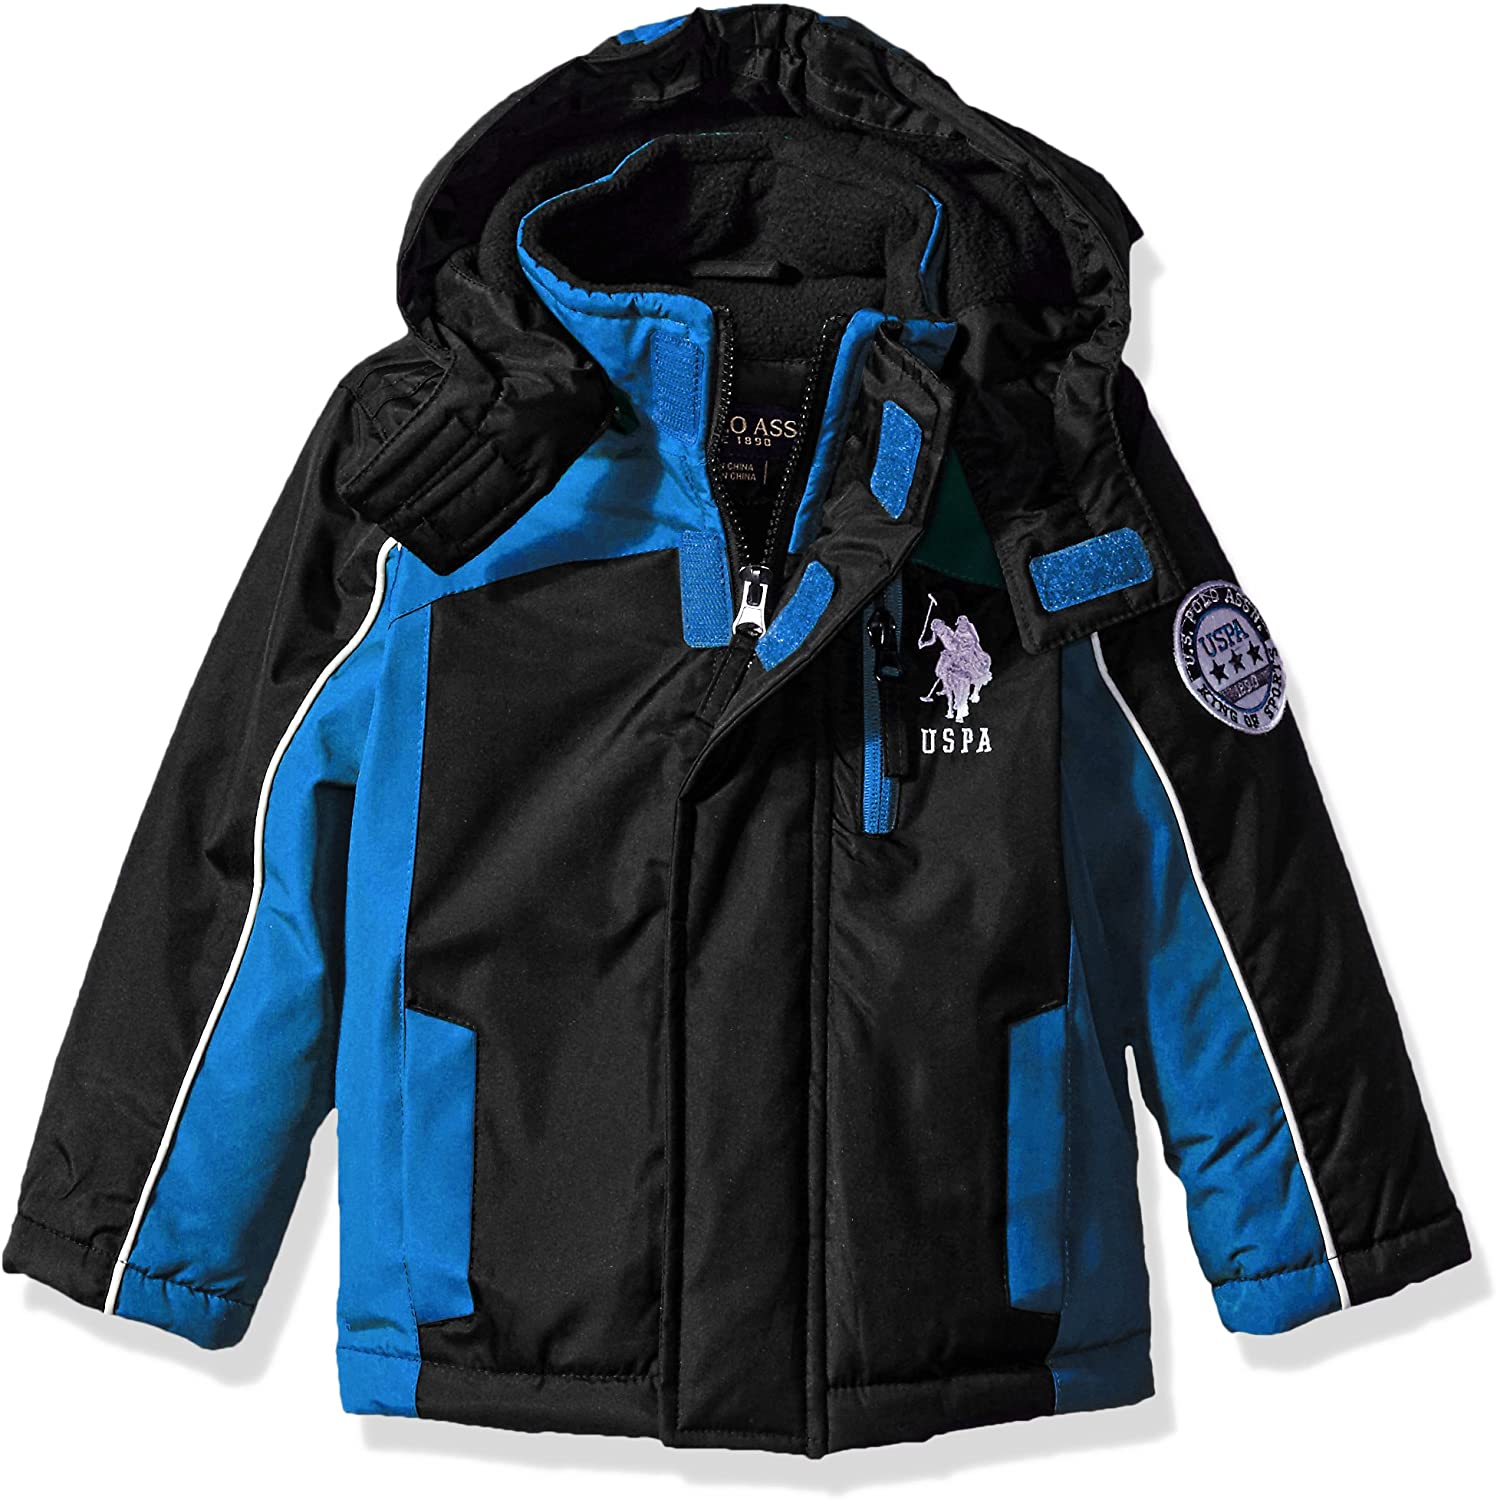 US Polo Association Toddler Boys' Outerwear Jacket (More Styles ...